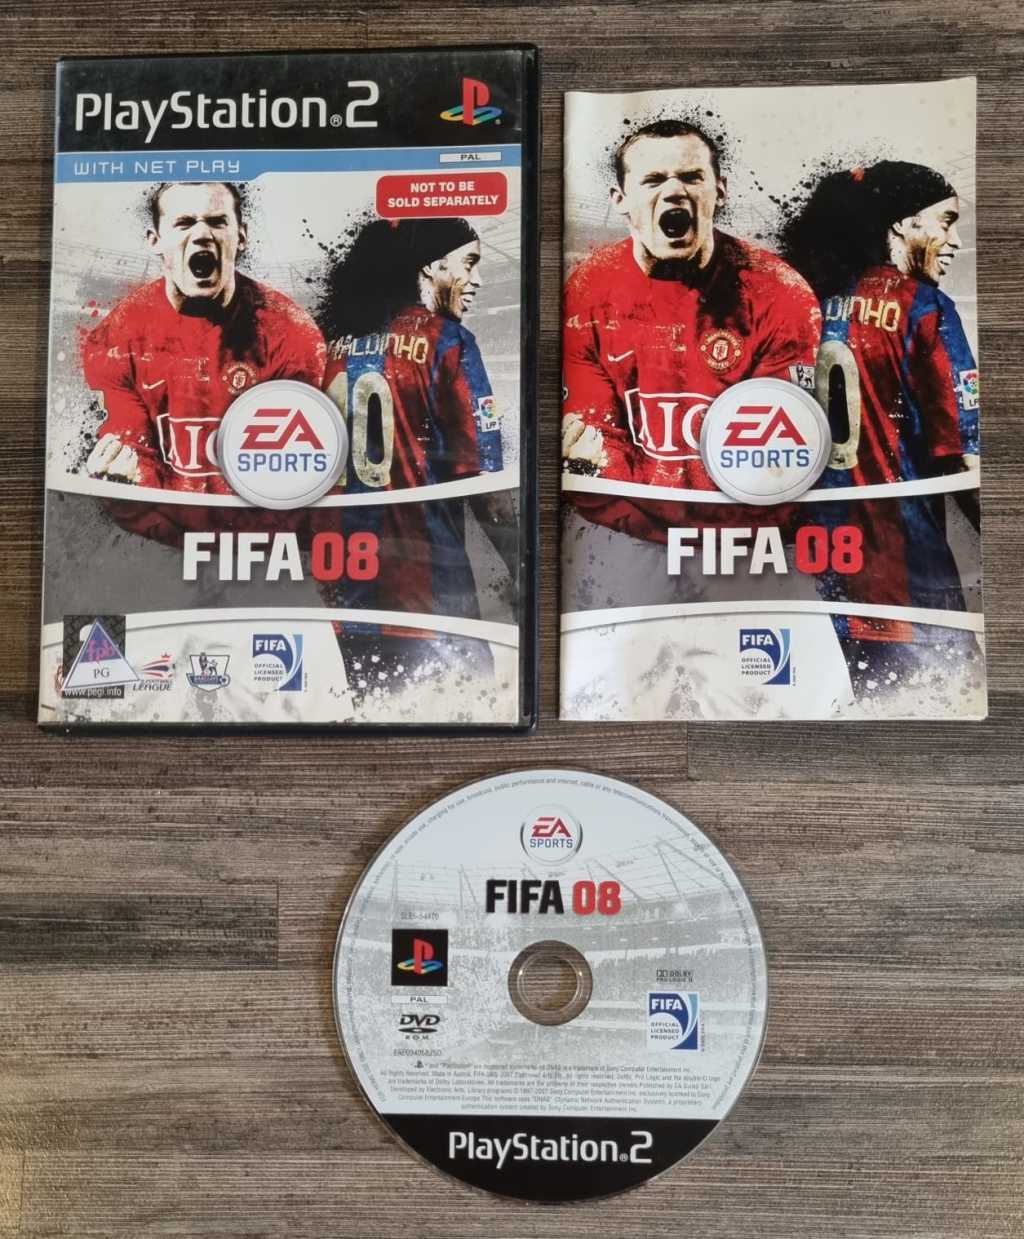 Games - Fifa 08 for PS2 - Complete for sale in Johannesburg (ID:614314019)